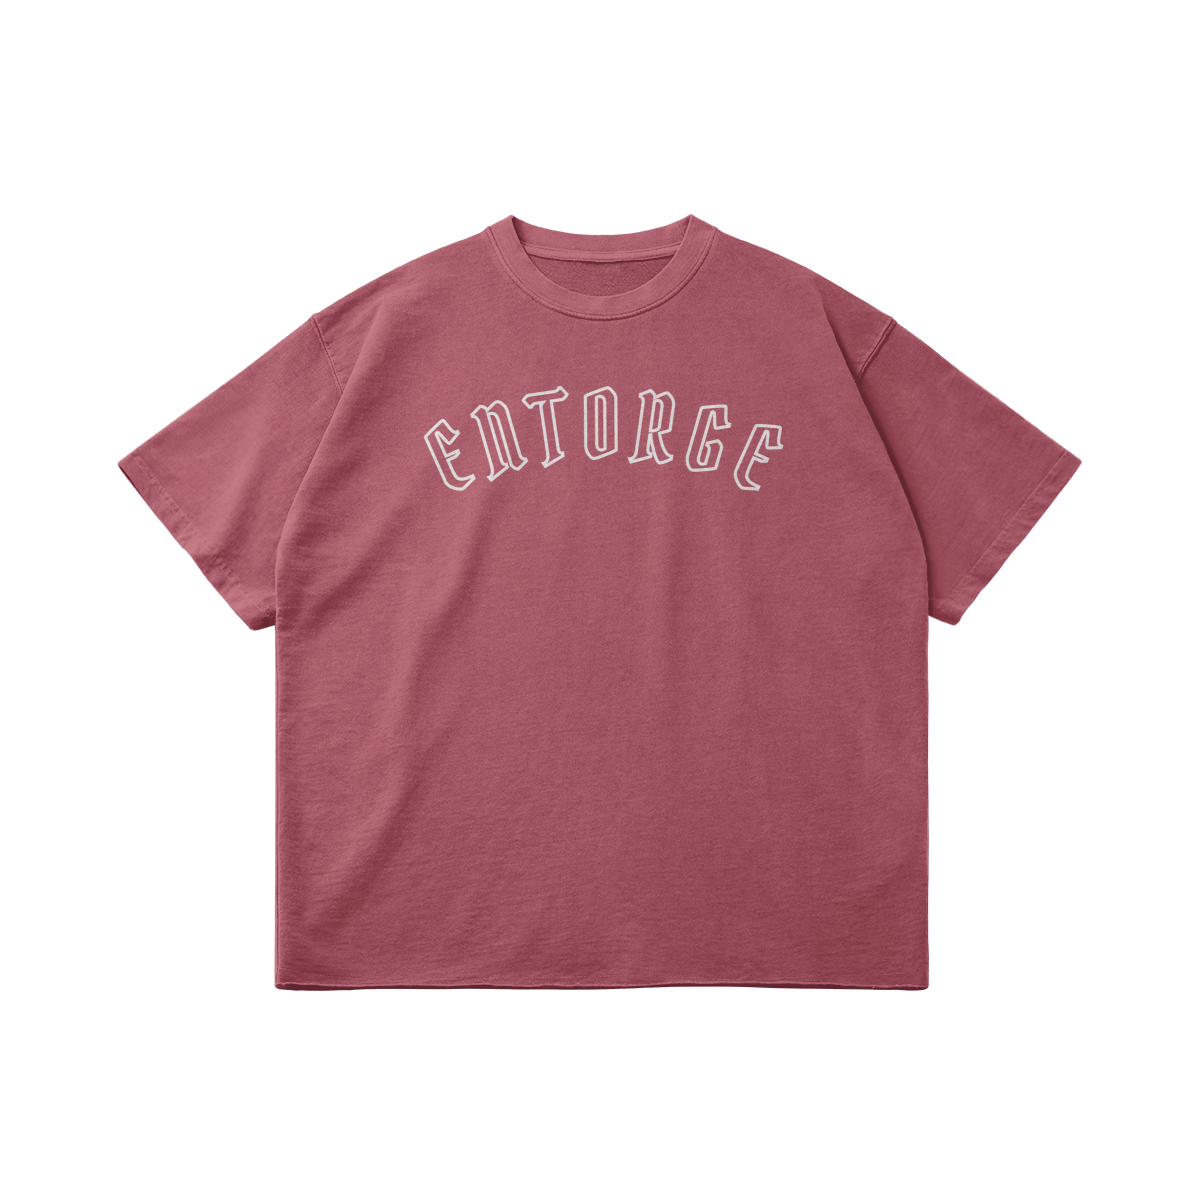 ENTORGE TEE CLASSIC